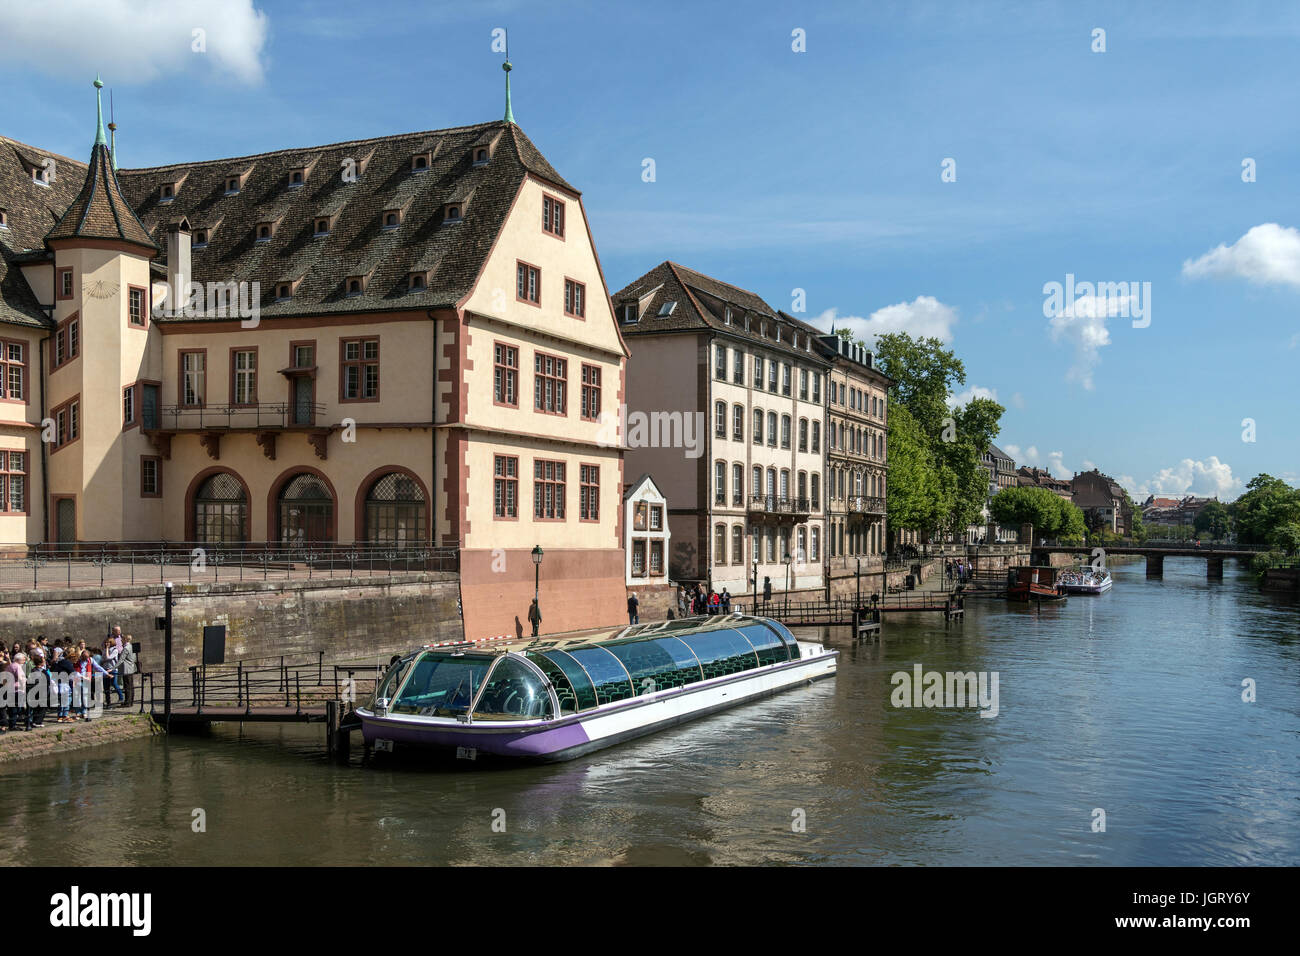 Tourist boat and old buildings in the historic city of Strasbourg in the Alsace region of France. This area of the city is a UNESCO World Heritage Sit Stock Photo